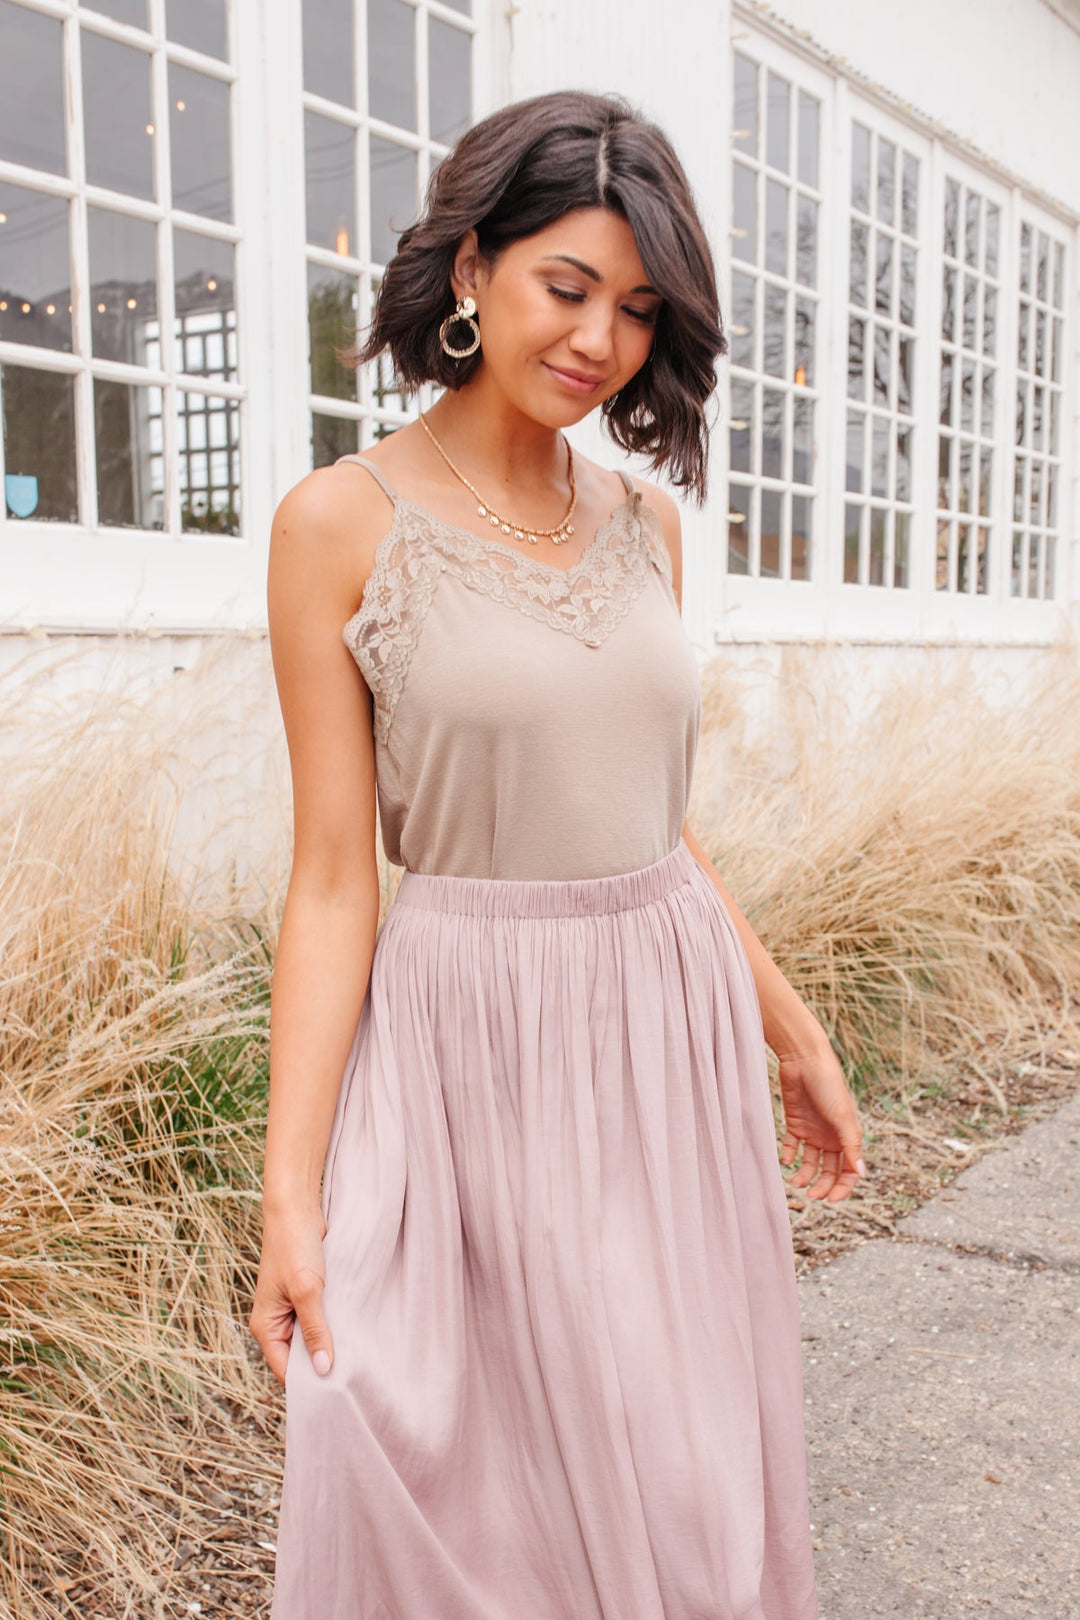 Weekend Vibes Mauve Skirt - Joy & Country